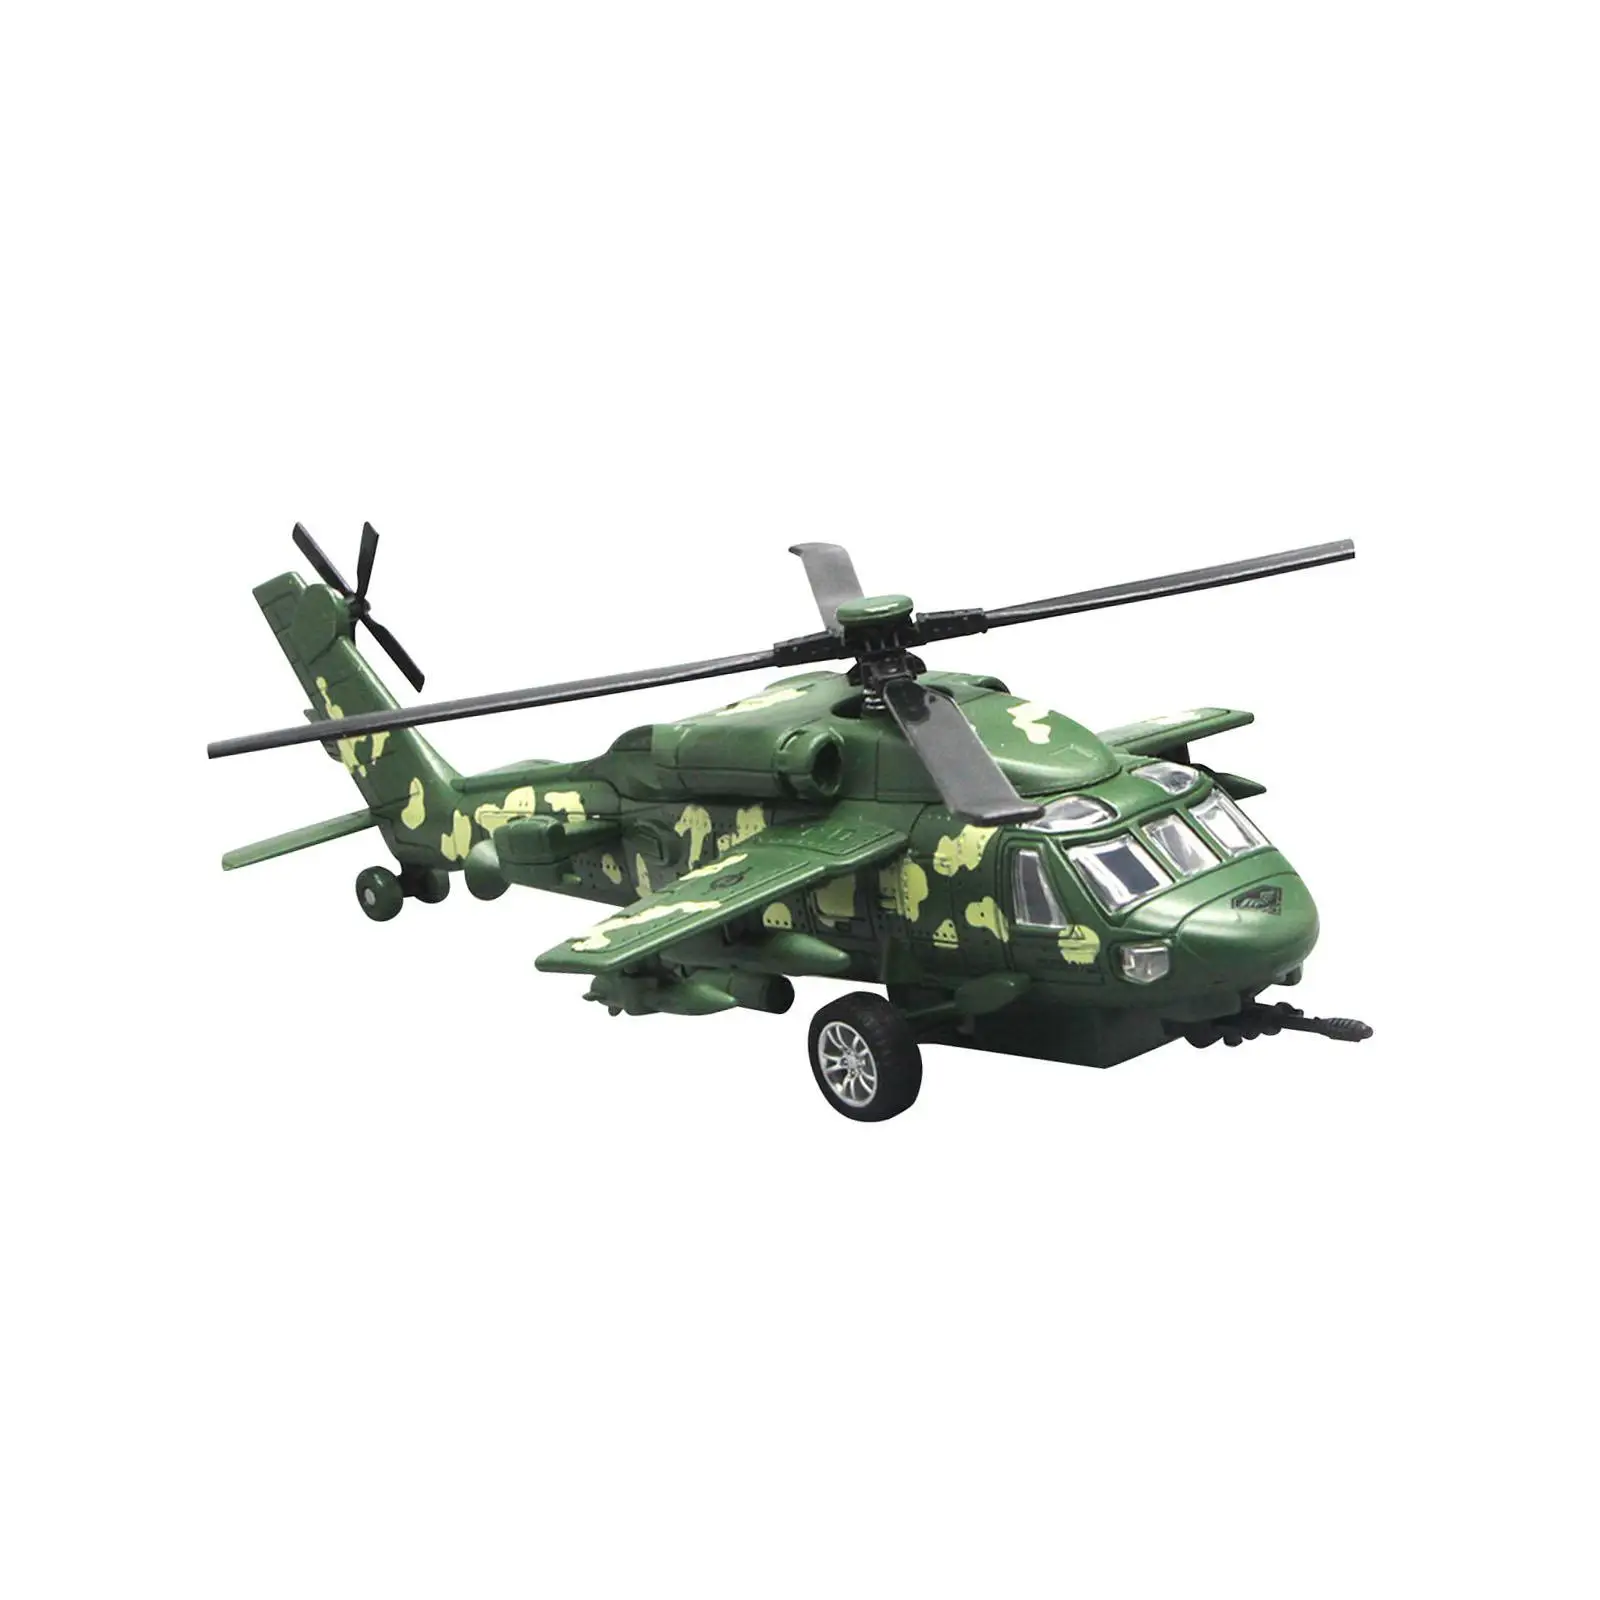 Diecast Helicopter Pull Back Aircraft Crafts Simulation Aviation Plane Model Souvenirs Kids Toys Holiday Gifts Shelf Commemorate